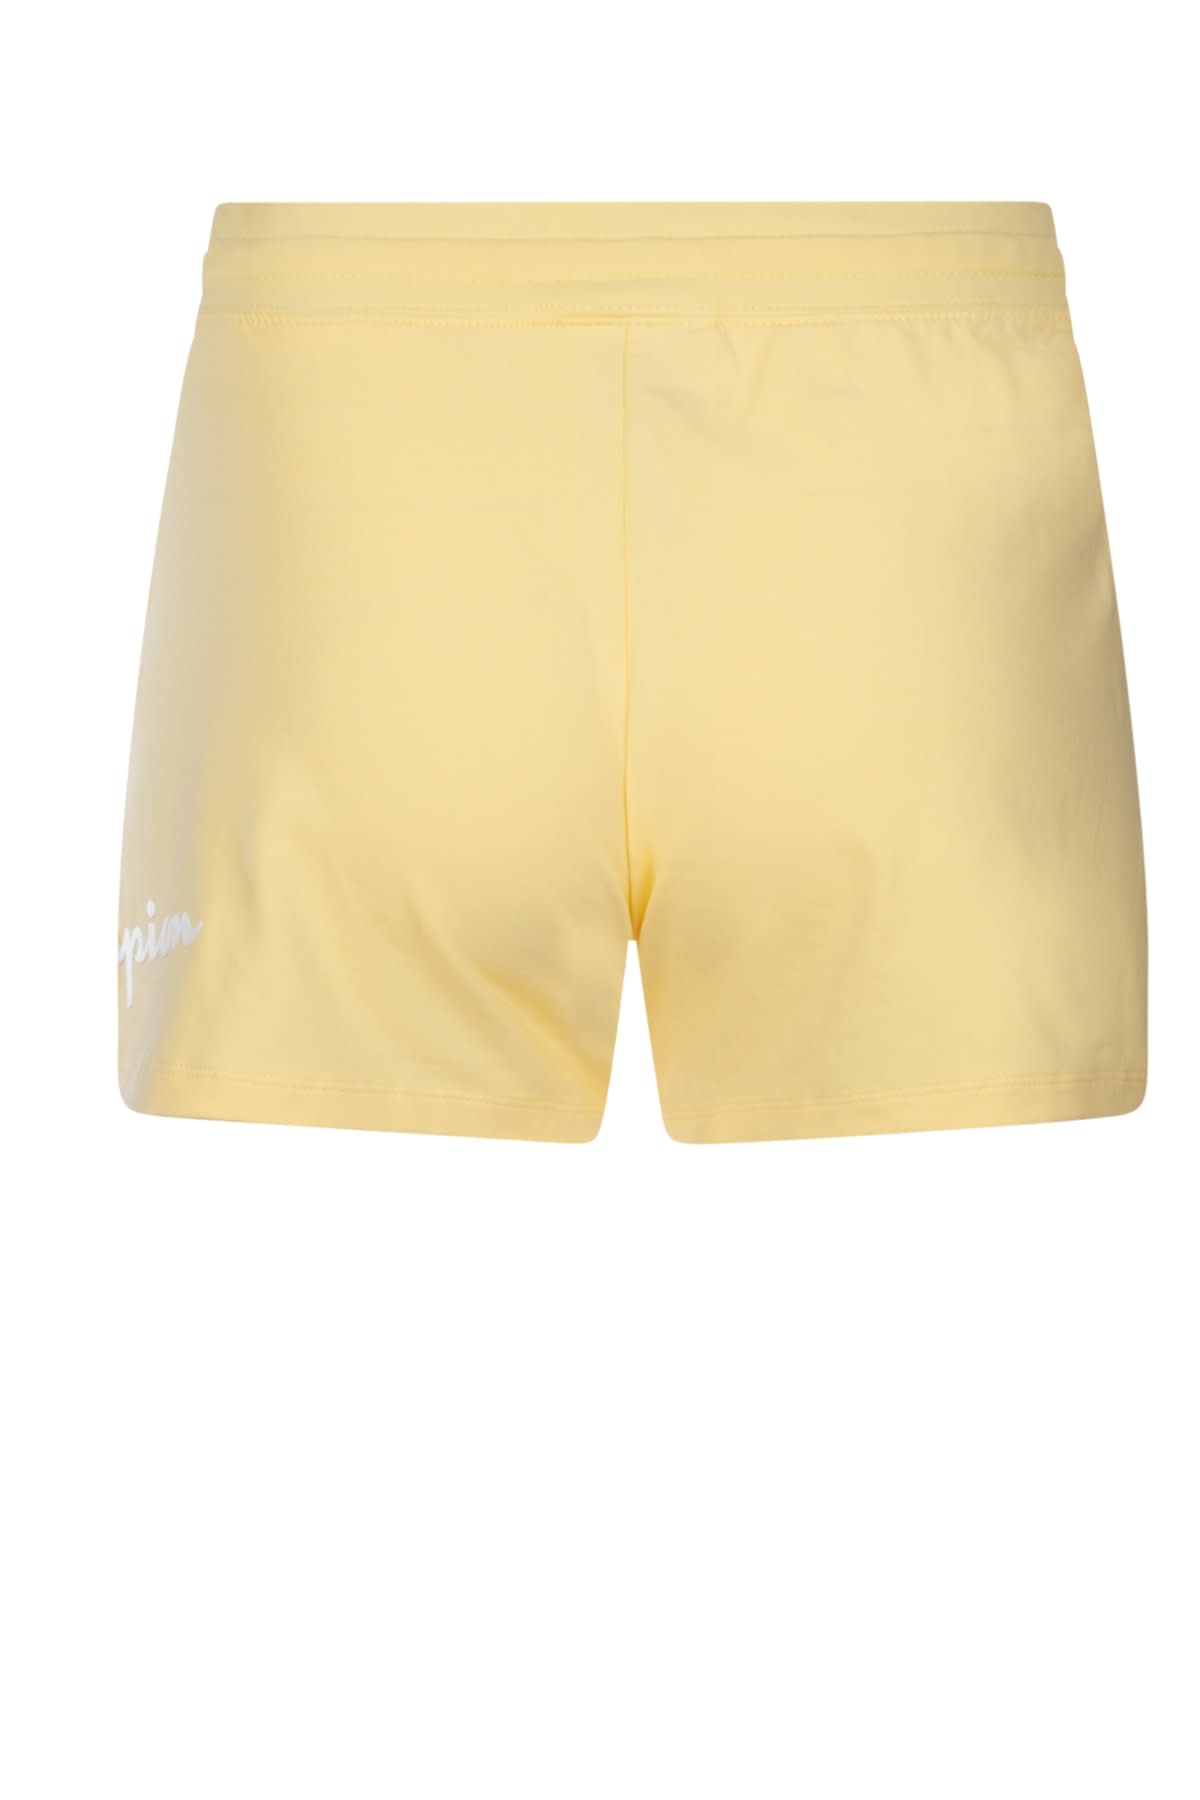 Champion Shorts In Ys105